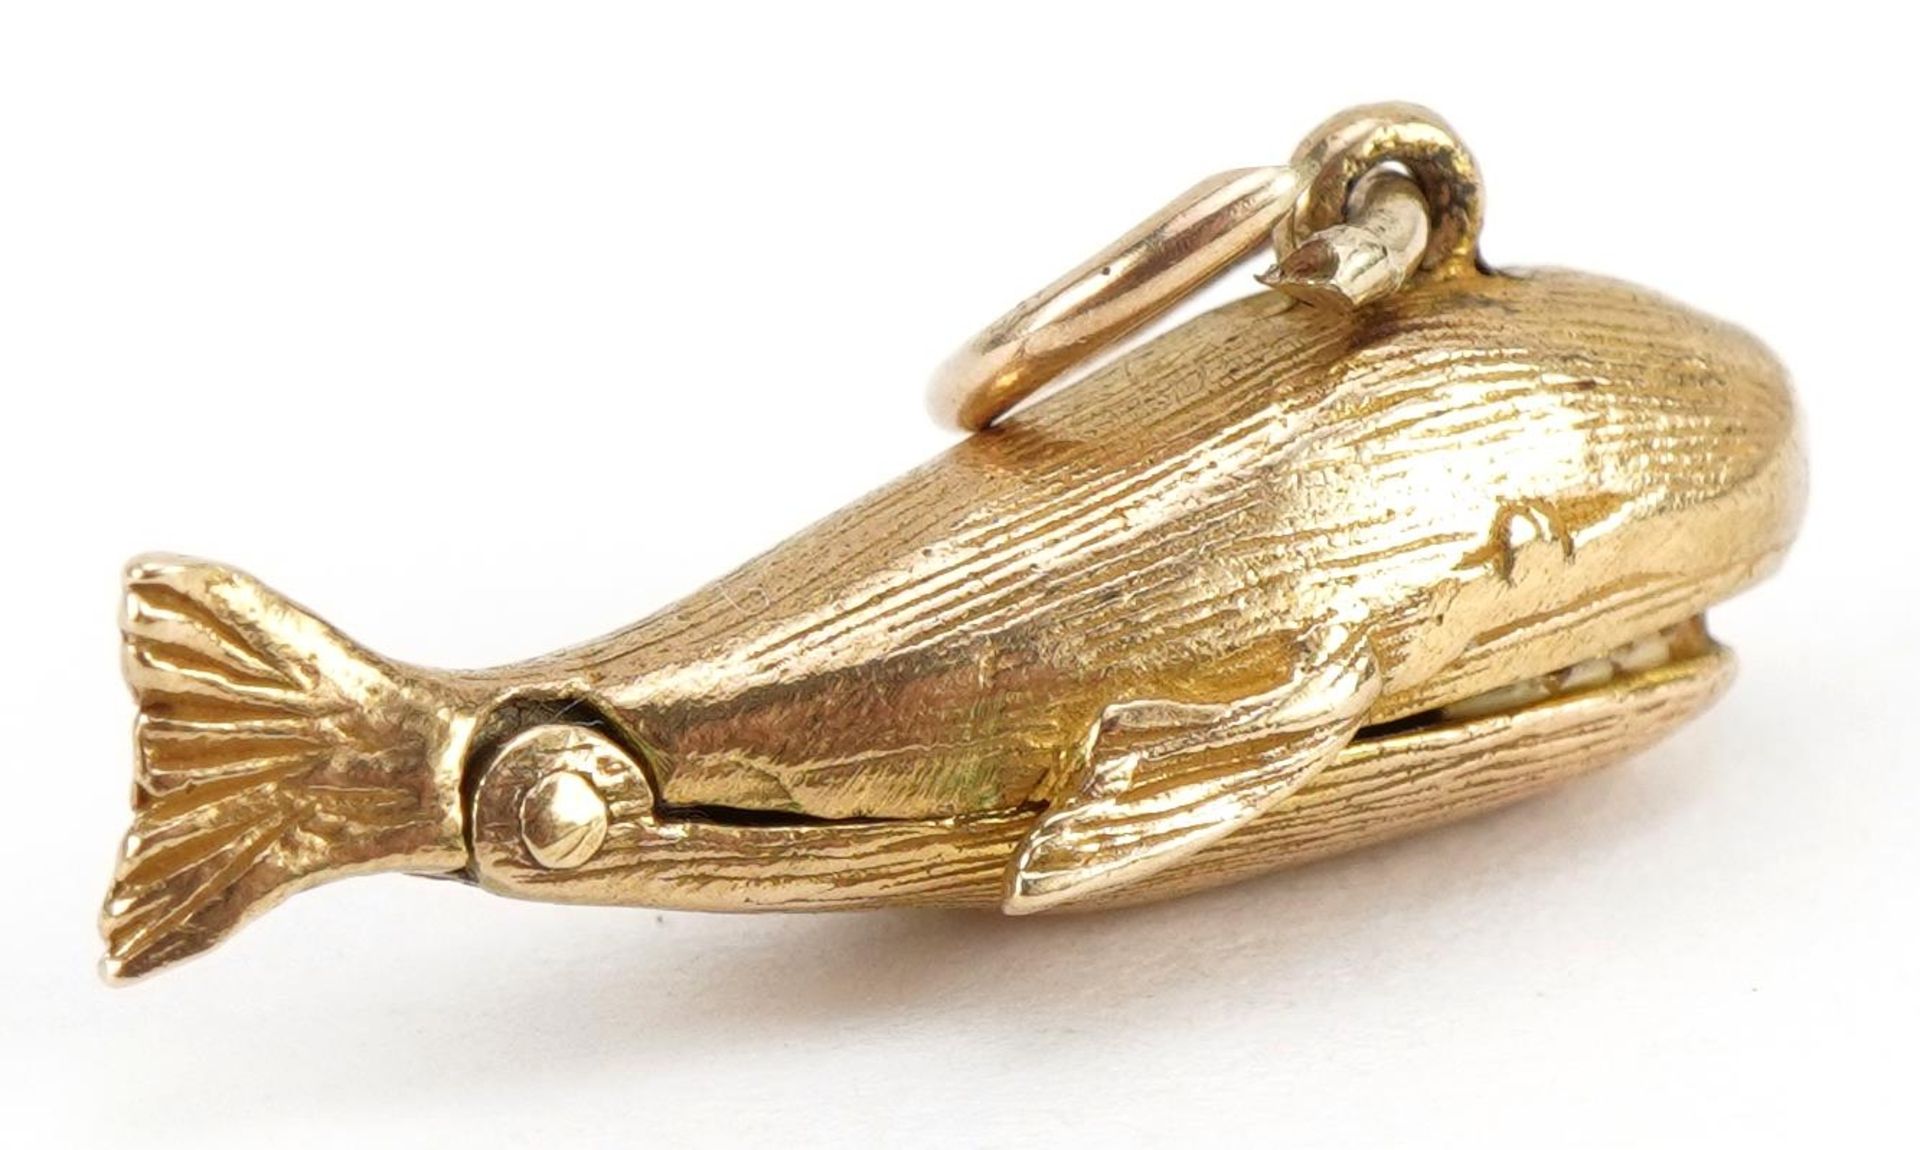 9ct gold whale charm with hinged mouth opening to reveal an enamelled figure, 2.3cm wide, 2.7g - Bild 2 aus 4